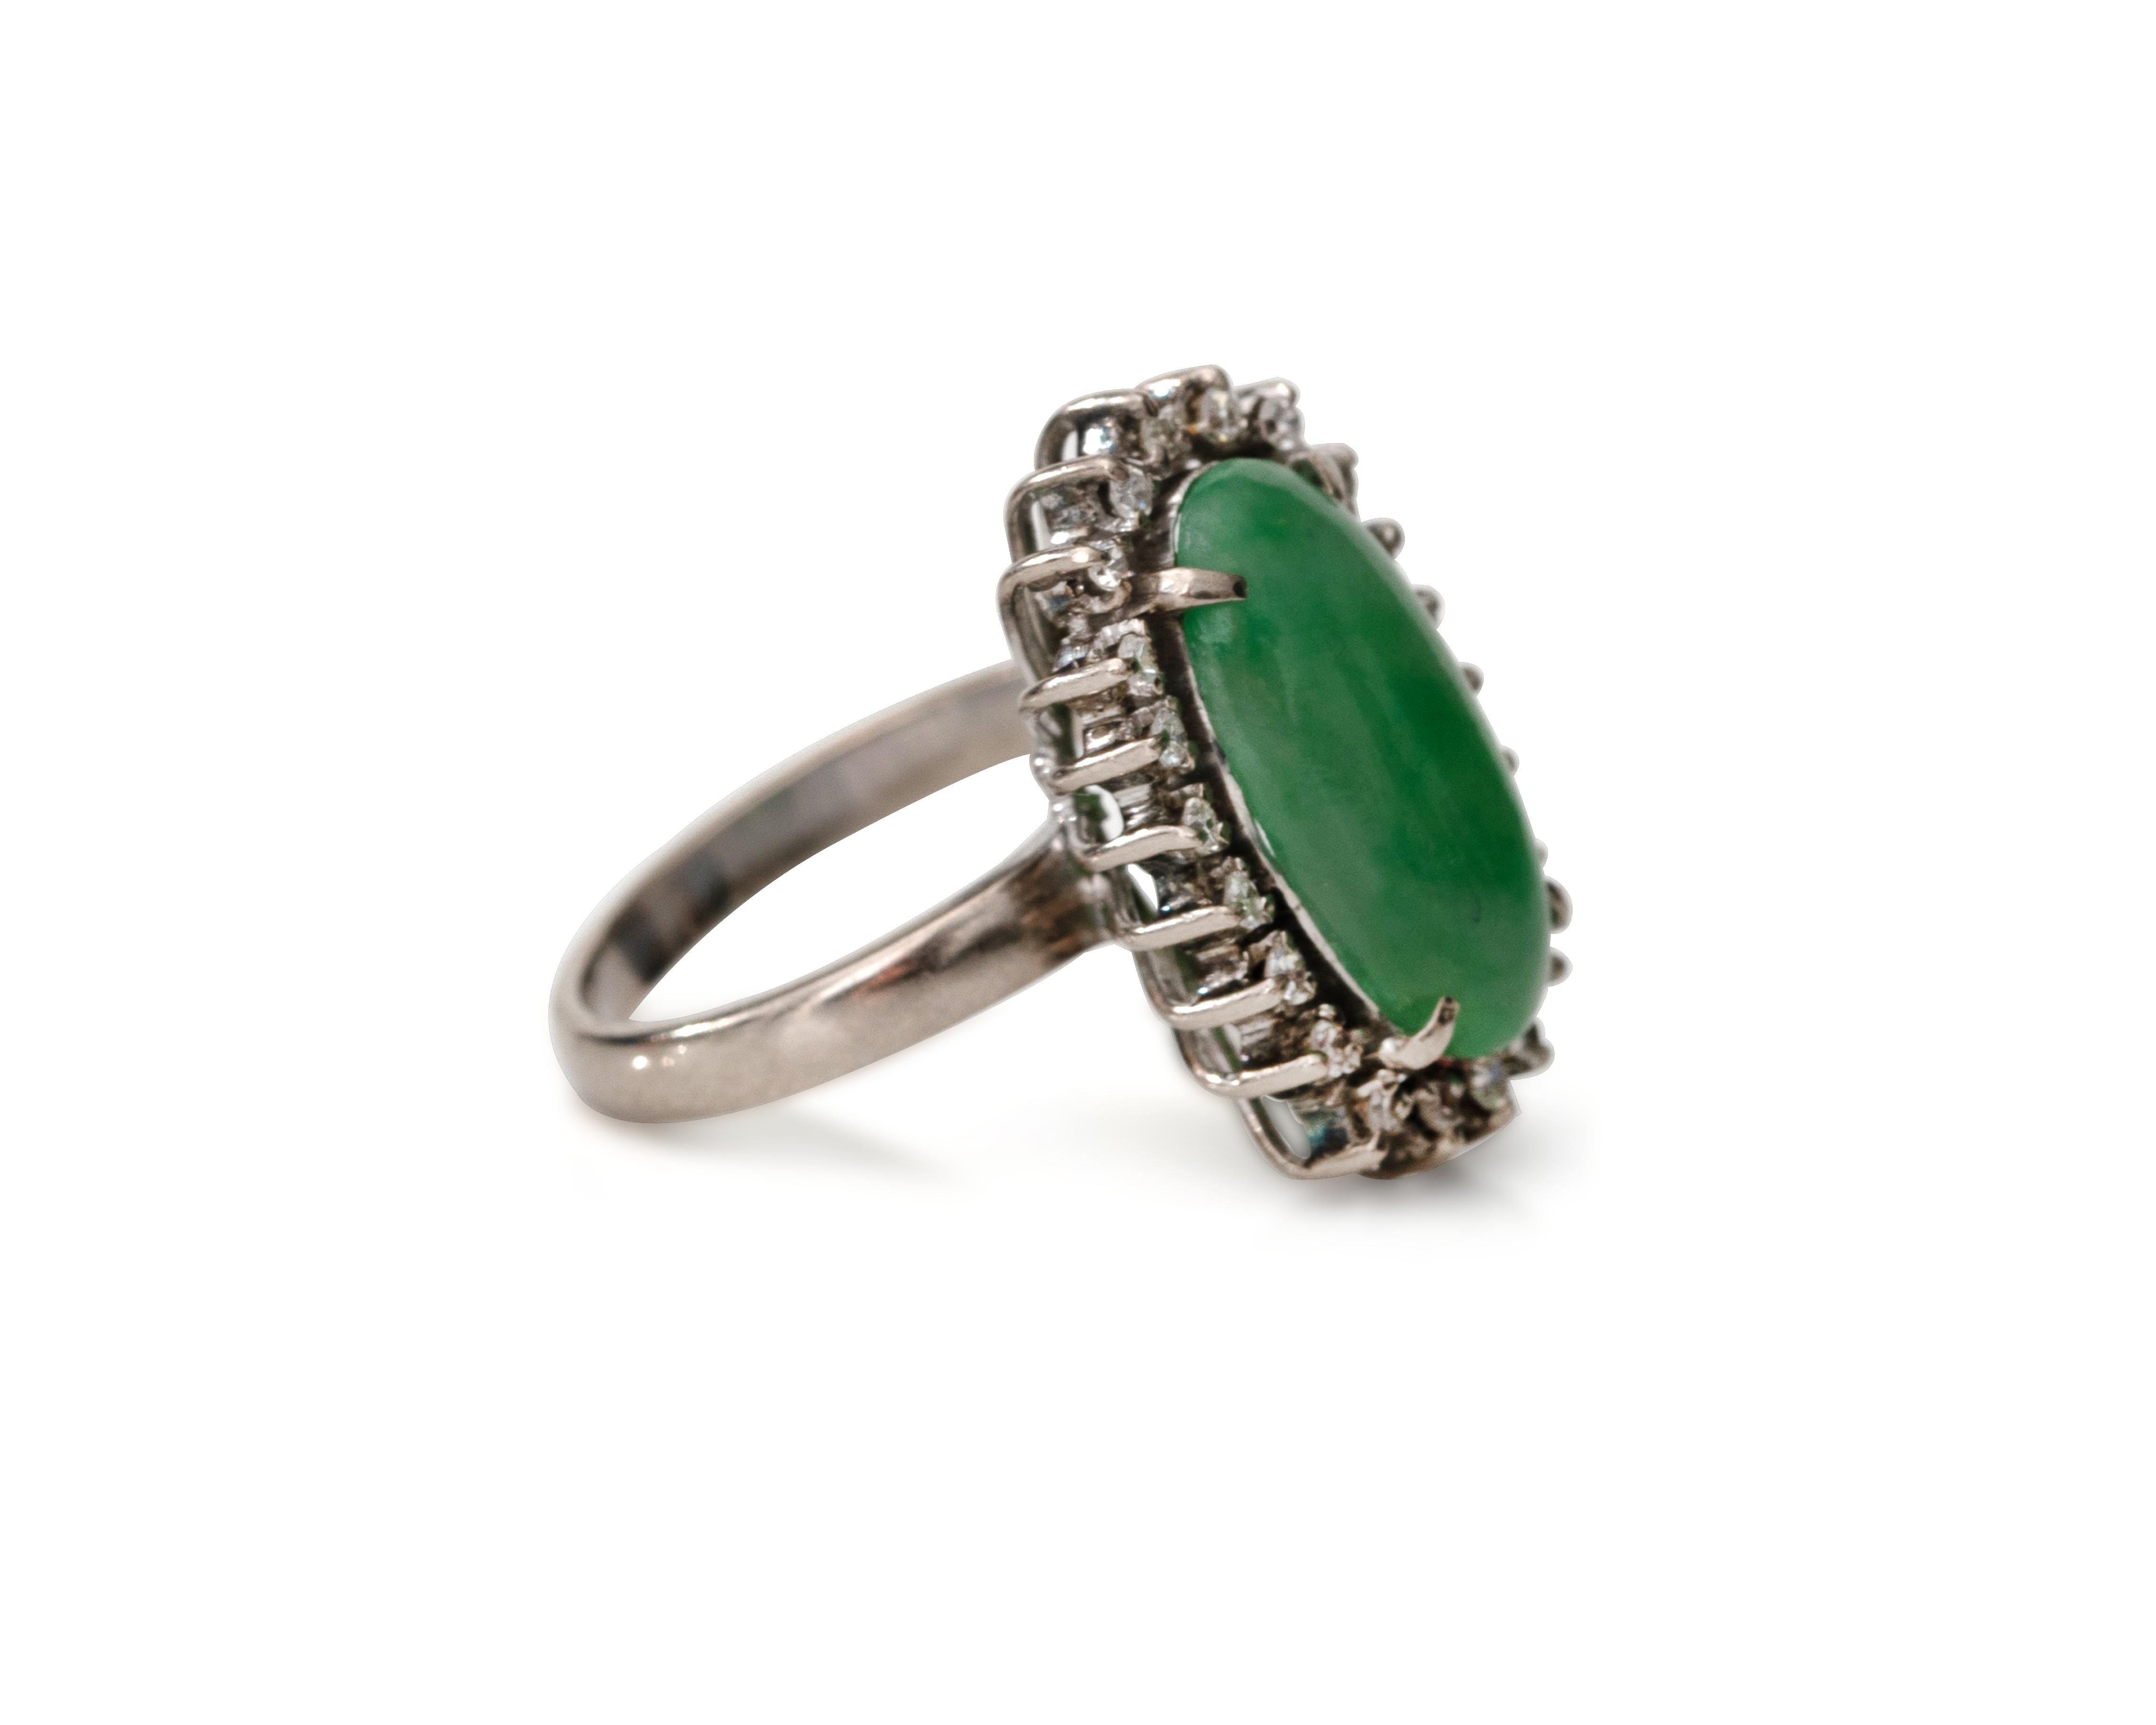 Stunning 1950s vintage Jade and Diamond Ring. The Jade is a beautiful oval cut cabochon with lovely hues of green. It has 4 talon prongs holding it in place. The Diamonds are all prong set and complement the perfect sparkle to the Jade

Ring